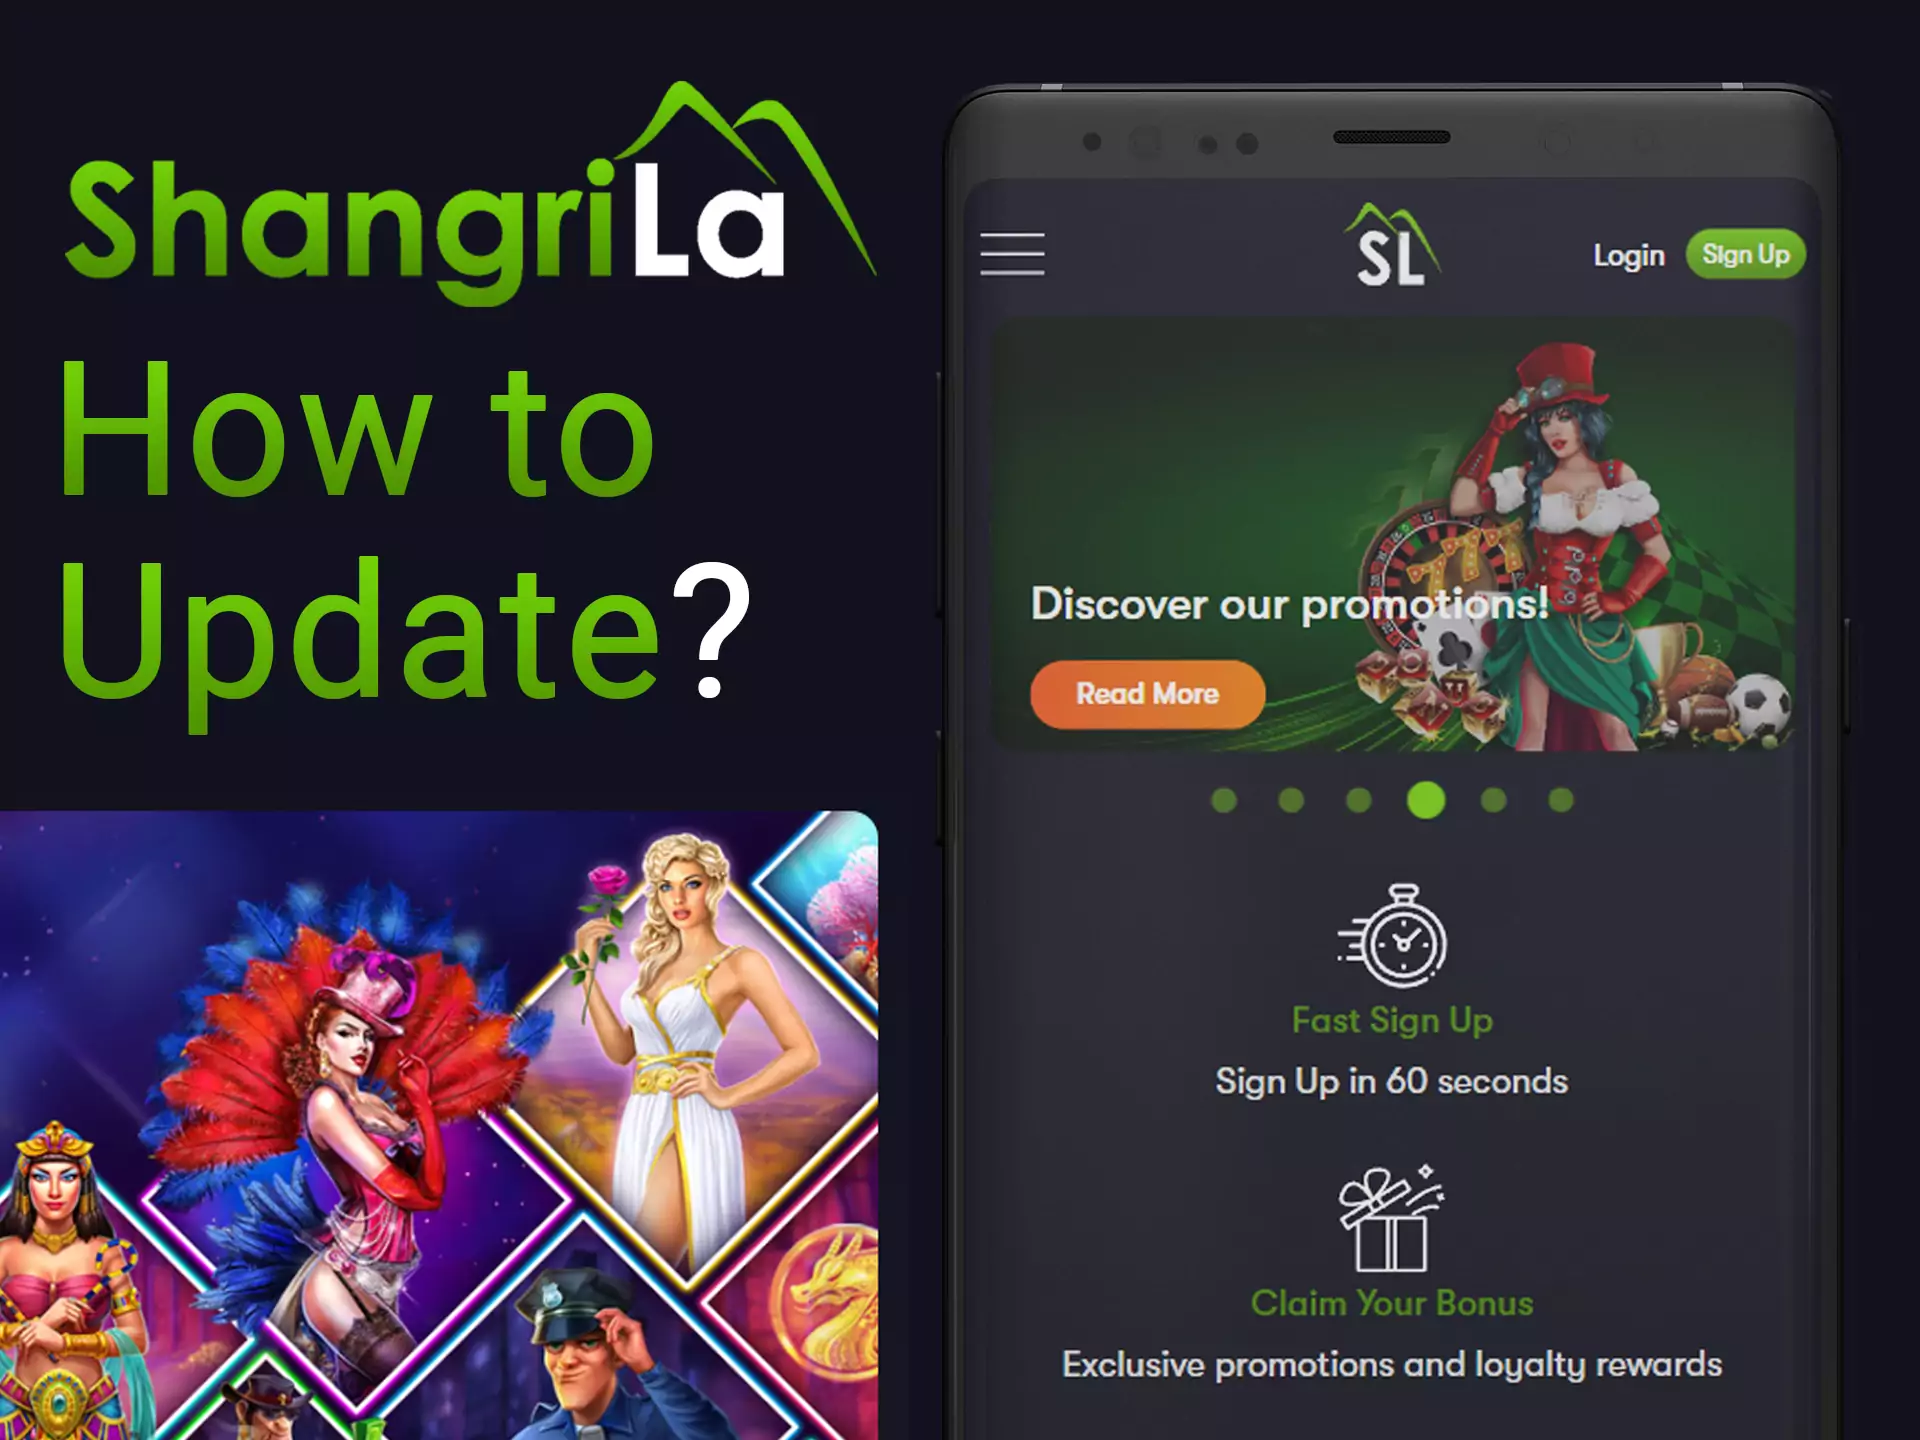 Shangri La app can updating automatically.